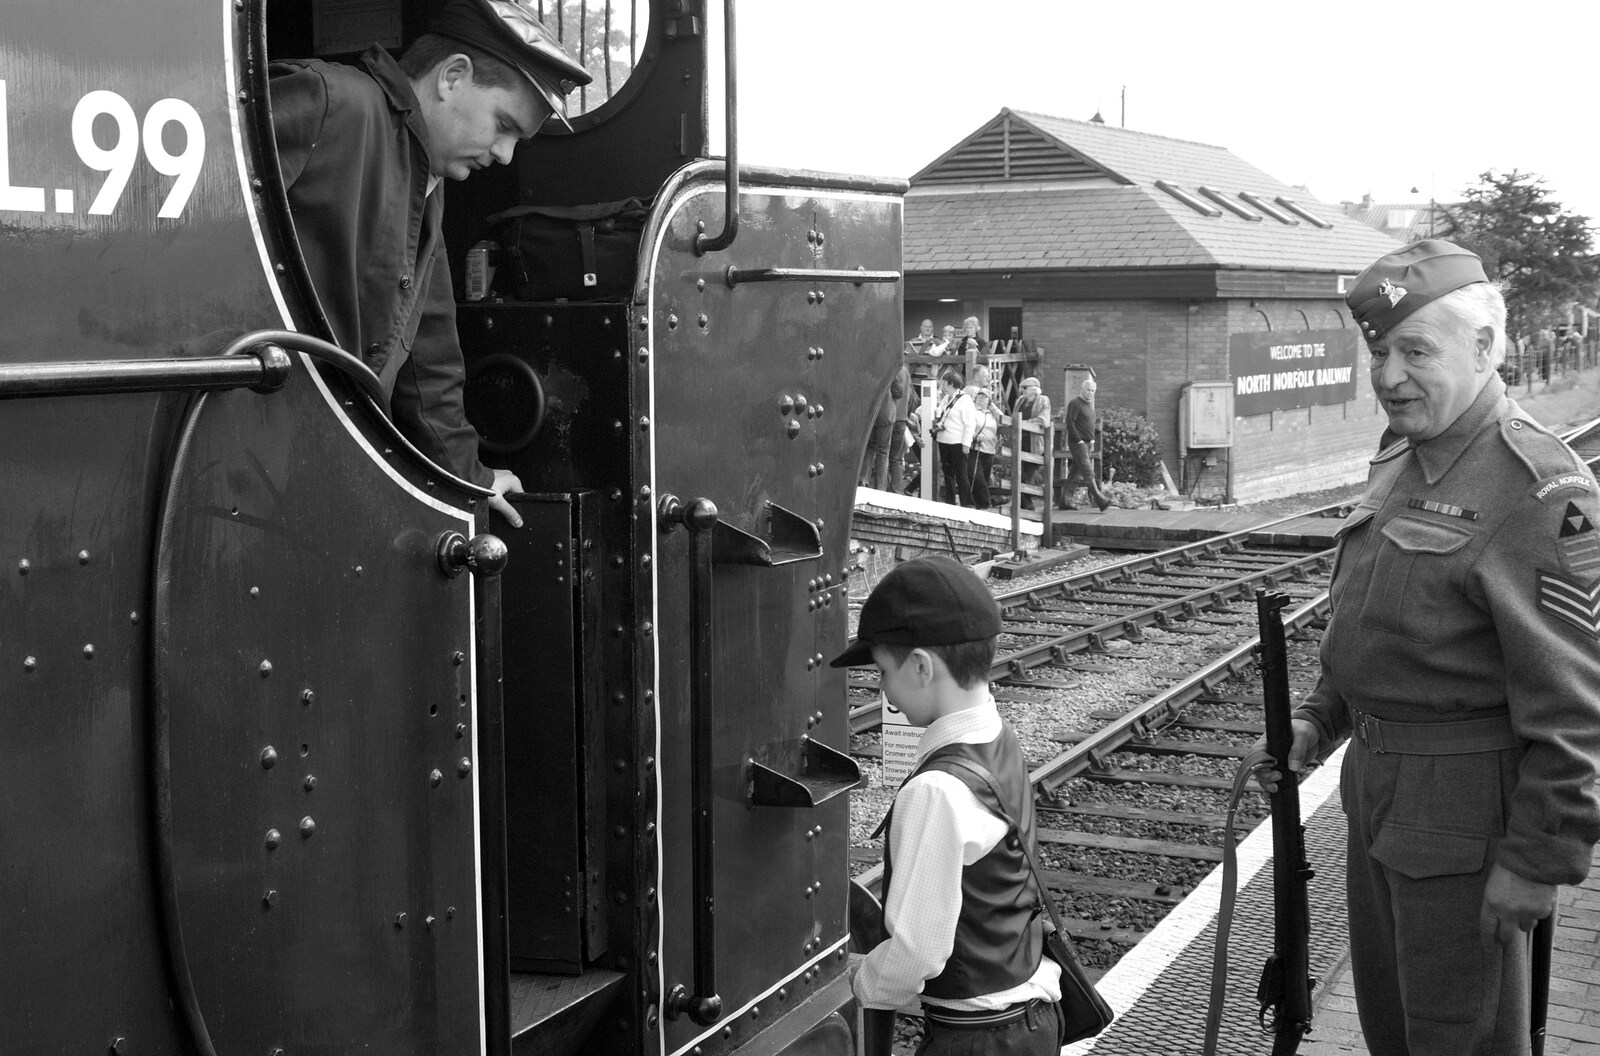 Pannier Tank Engine L.99 at Sheringham from The 1940s Steam Train Weekend, Holt, Norfolk - 18th September 2011